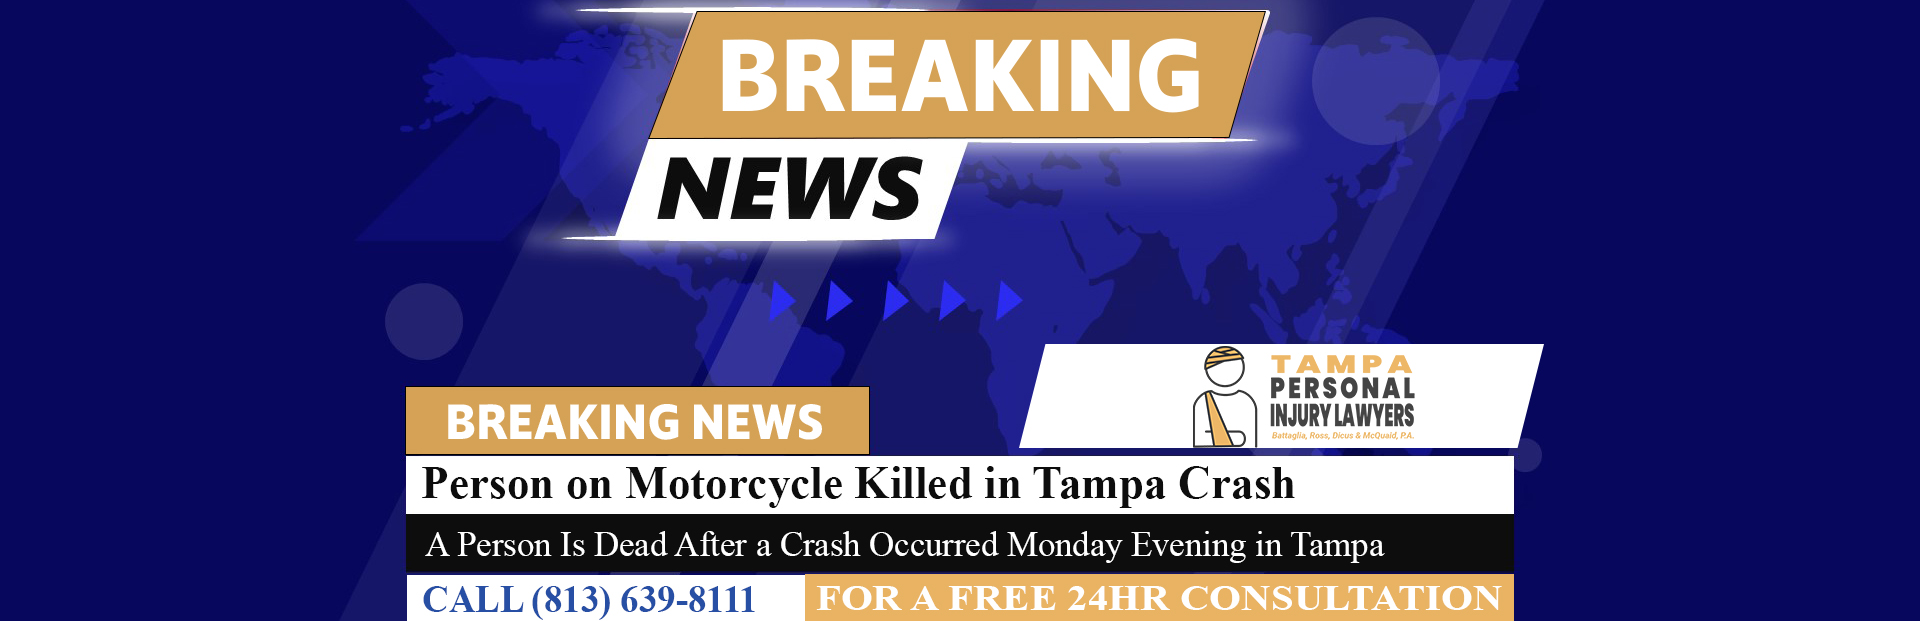 [09-26-23] Person on Motorcycle Killed in Tampa Crash